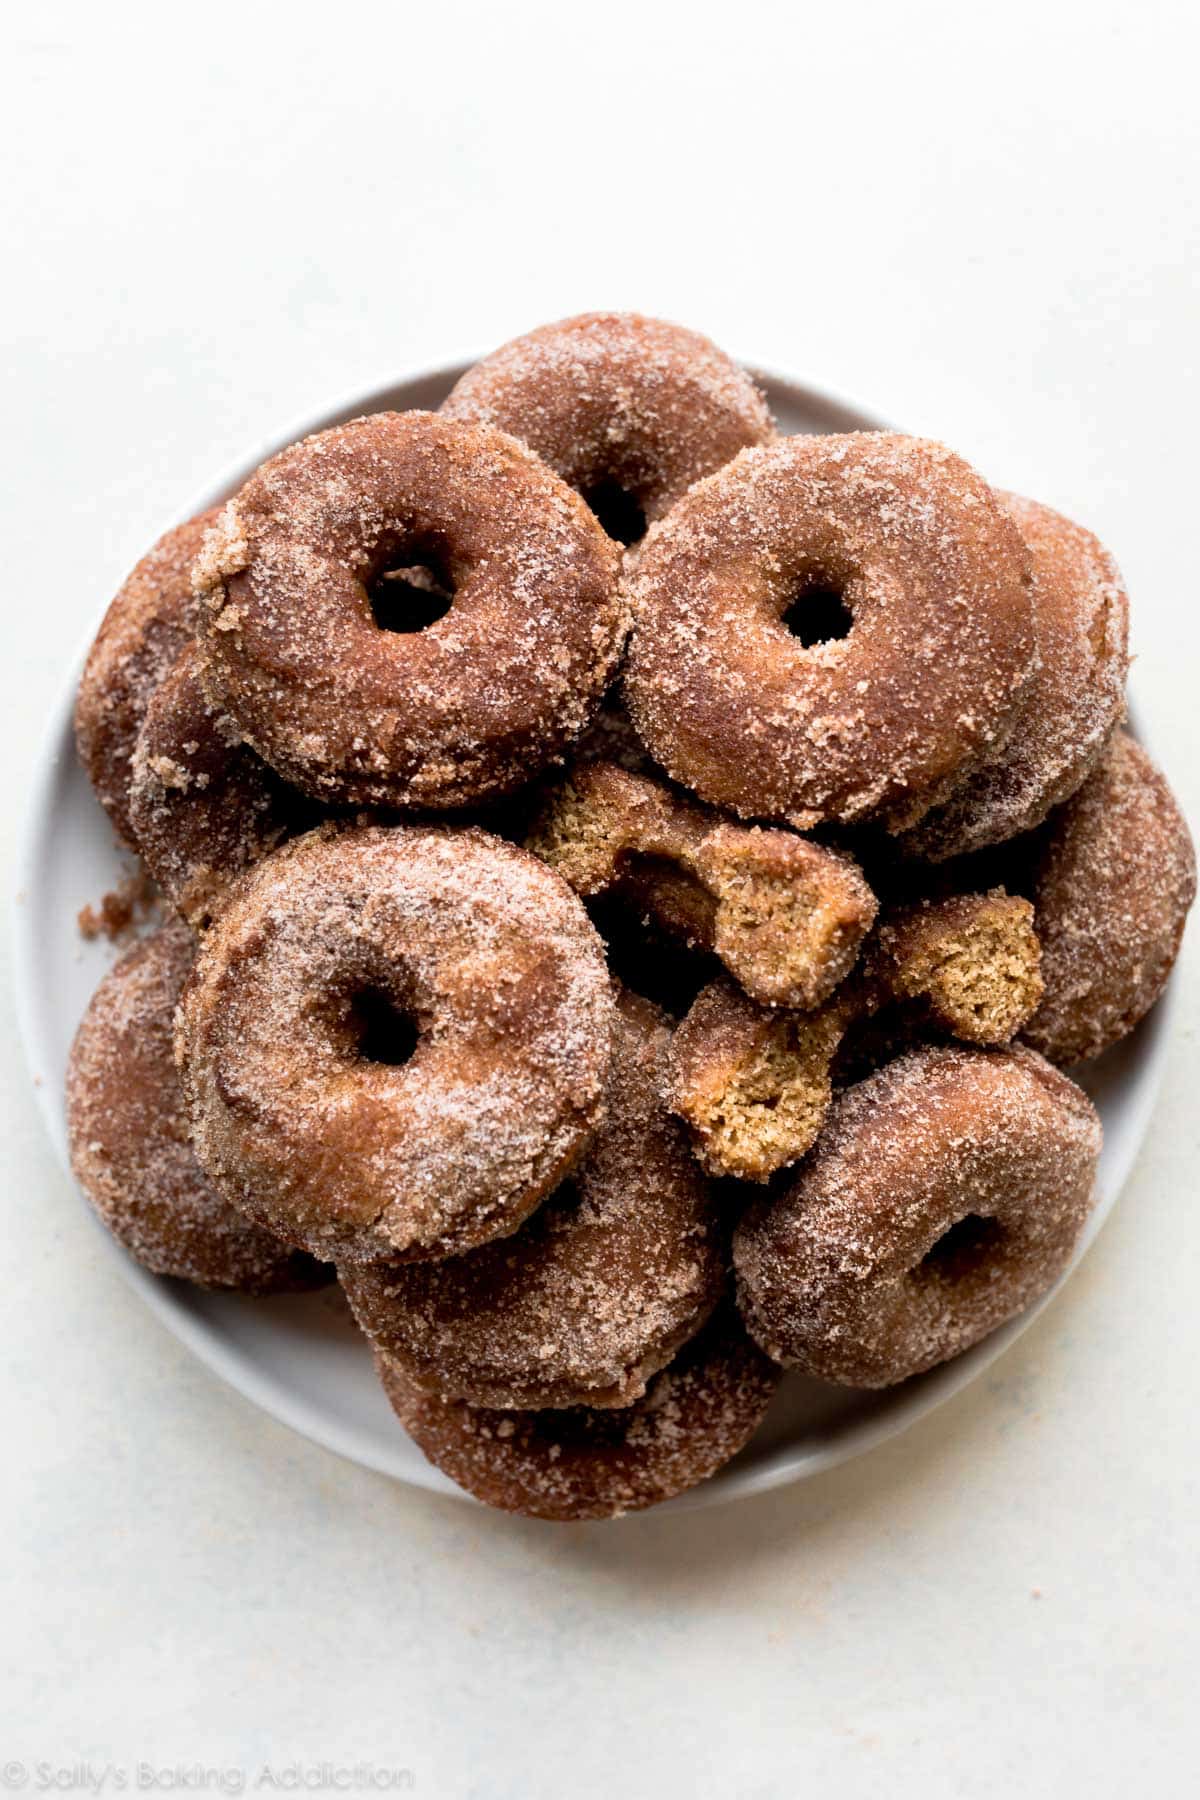 Baked apple cider donuts on a white plate